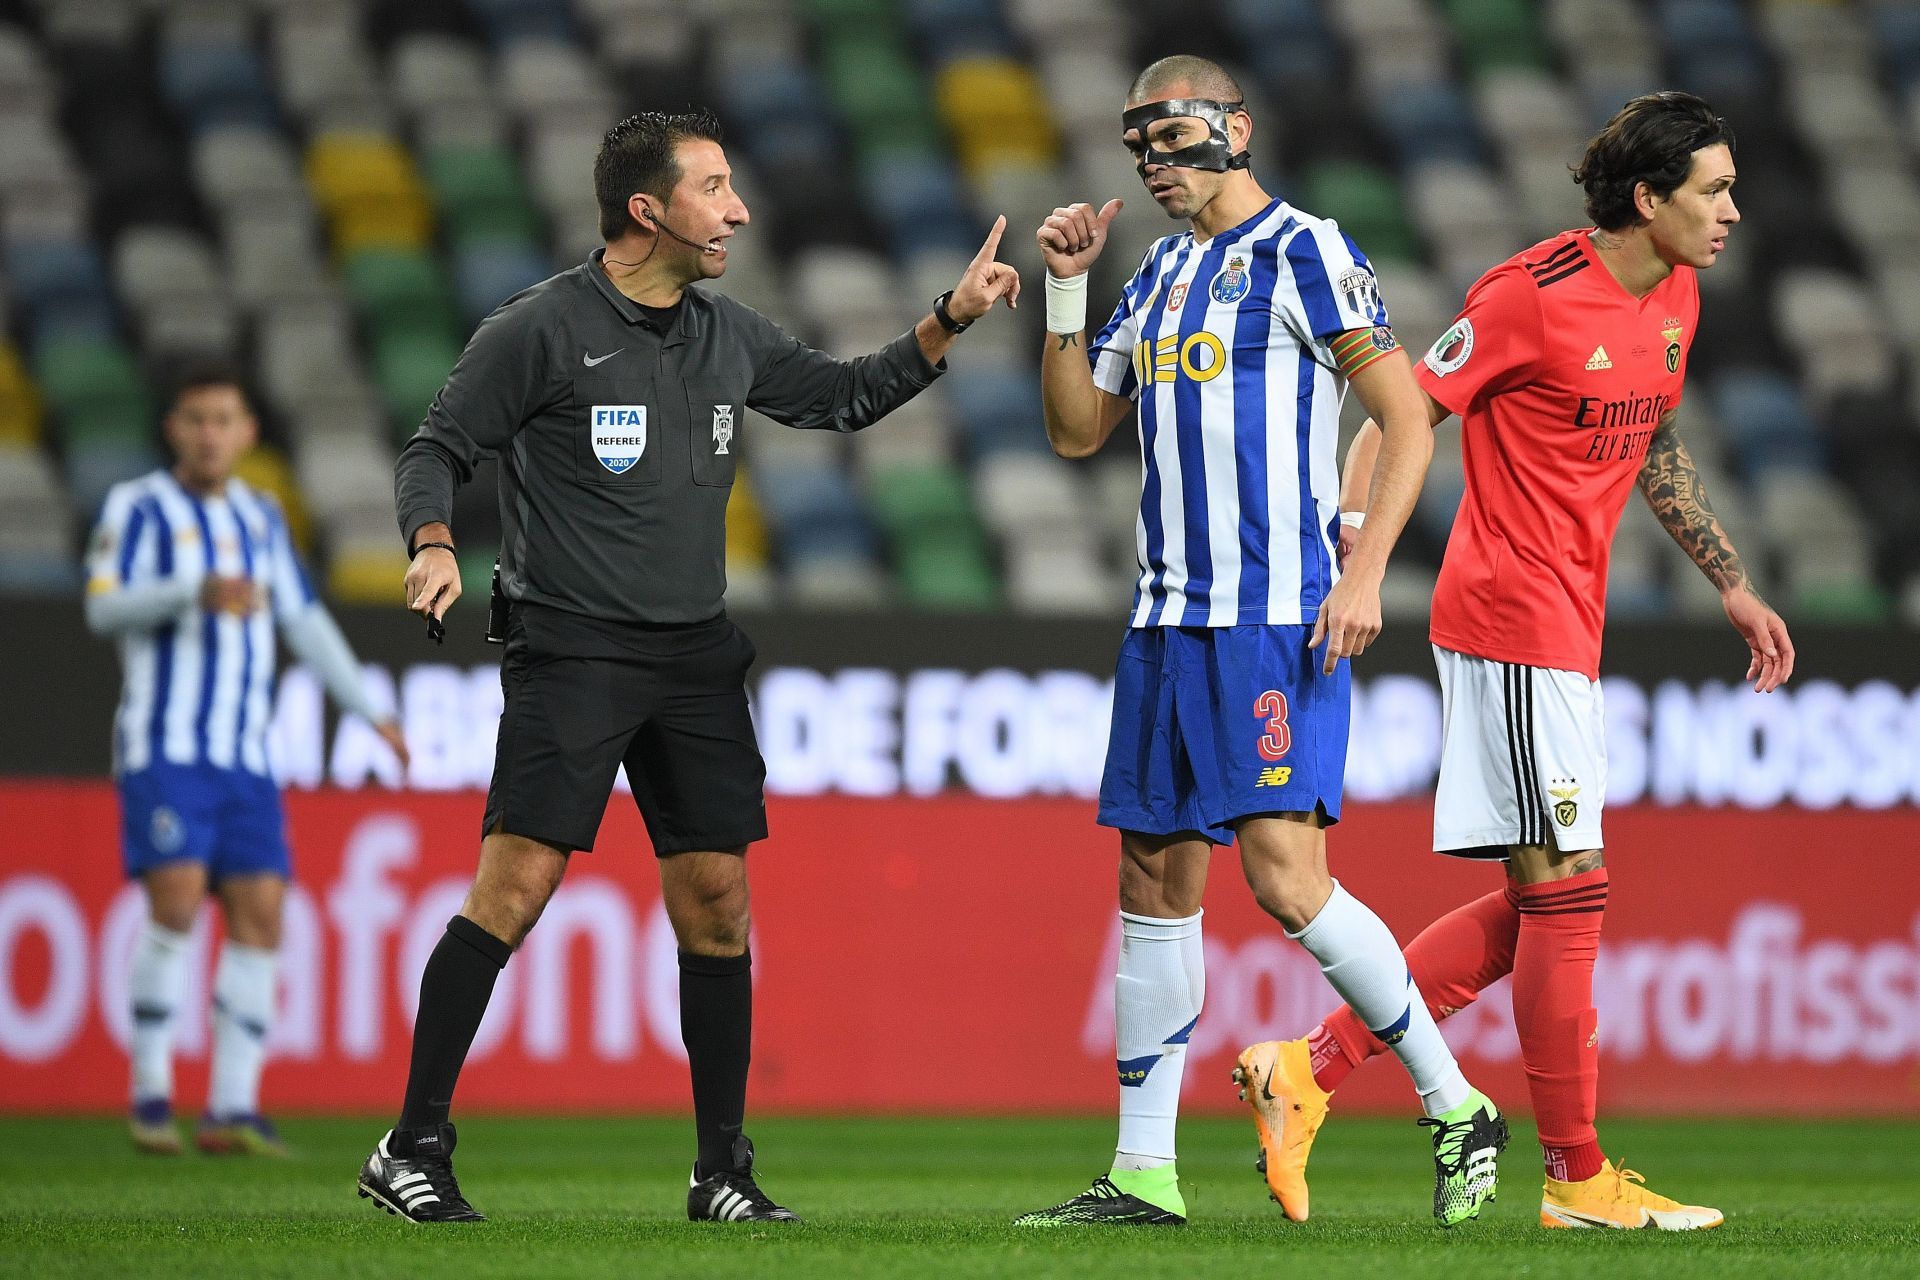 Porto and Benfica square off on Thursday